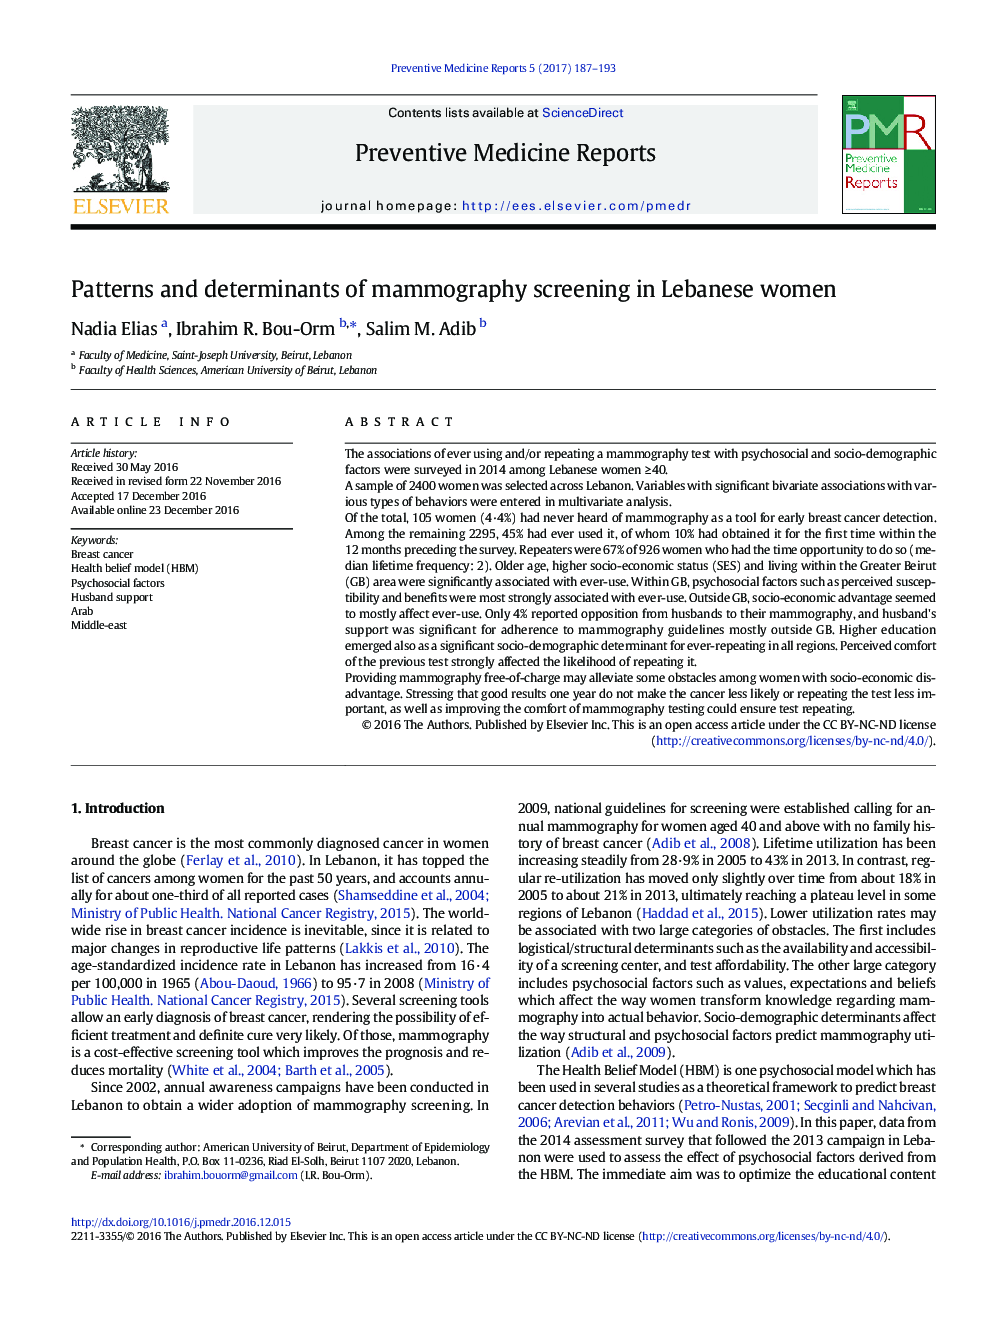 Patterns and determinants of mammography screening in Lebanese women